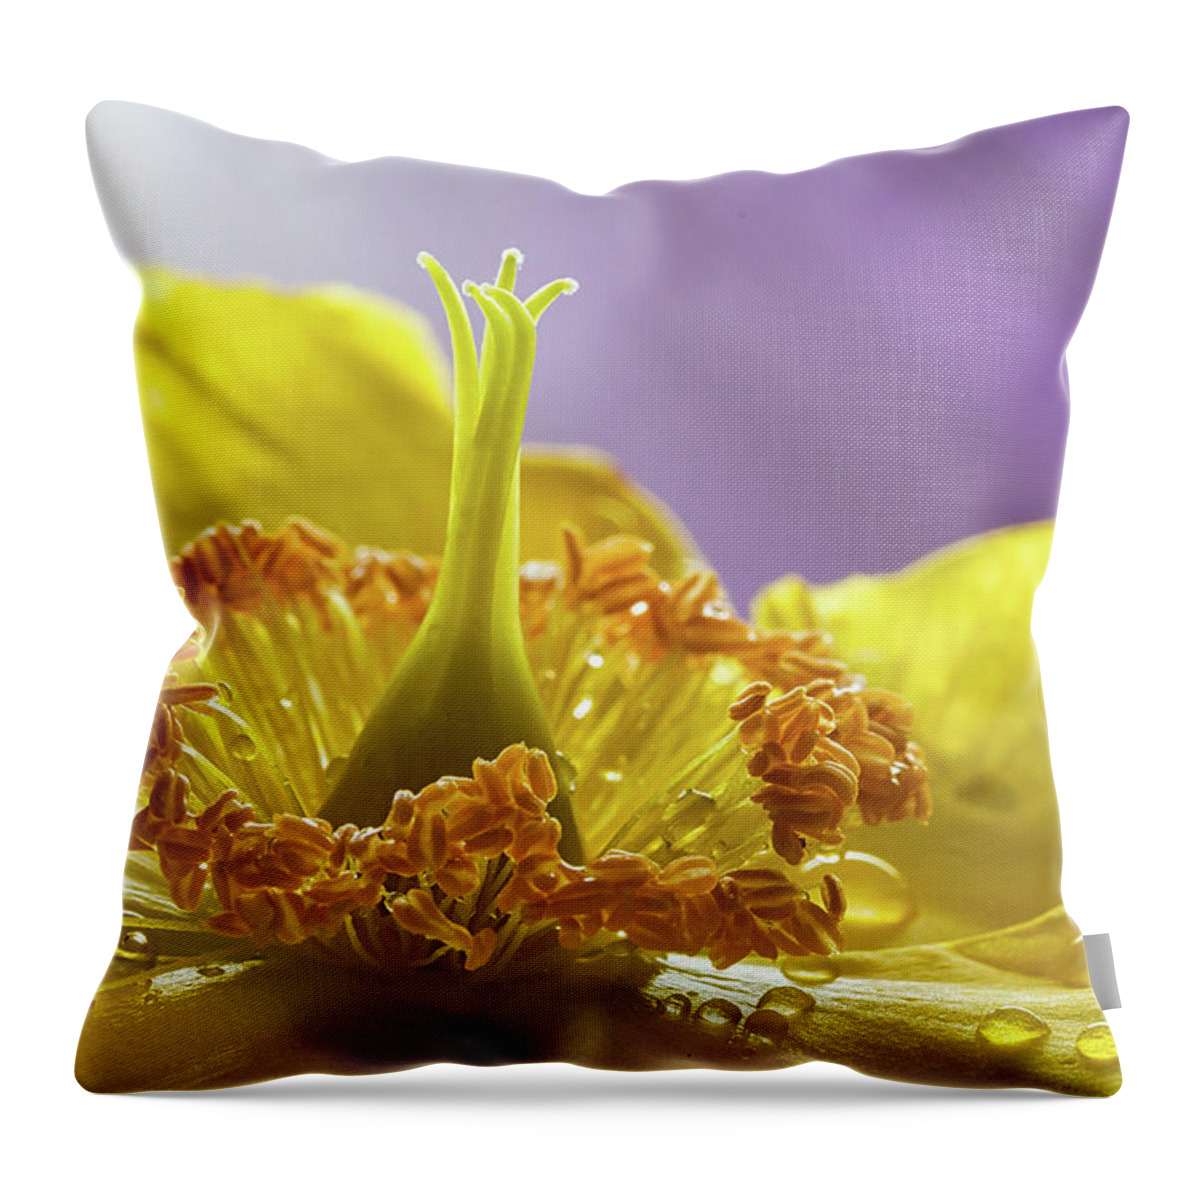 Wort Throw Pillow featuring the photograph St Johns Wort Flower #1 by Shirley Mitchell